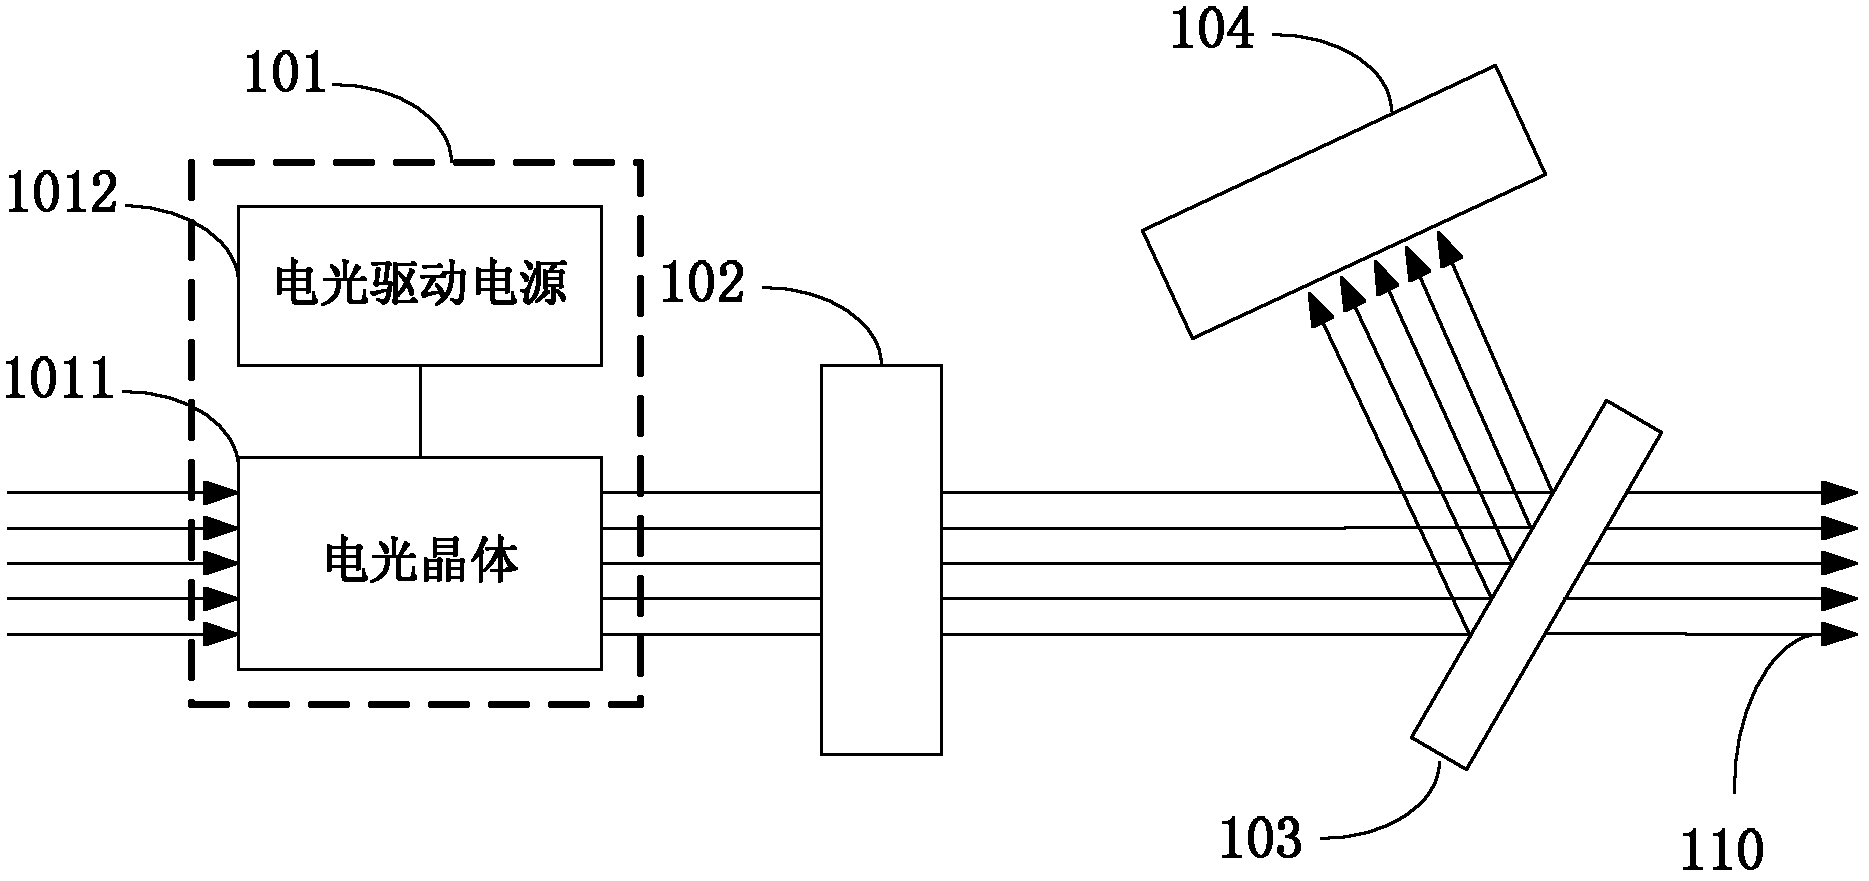 Periodically modulated flat-top pulse device with precise control of output power/energy